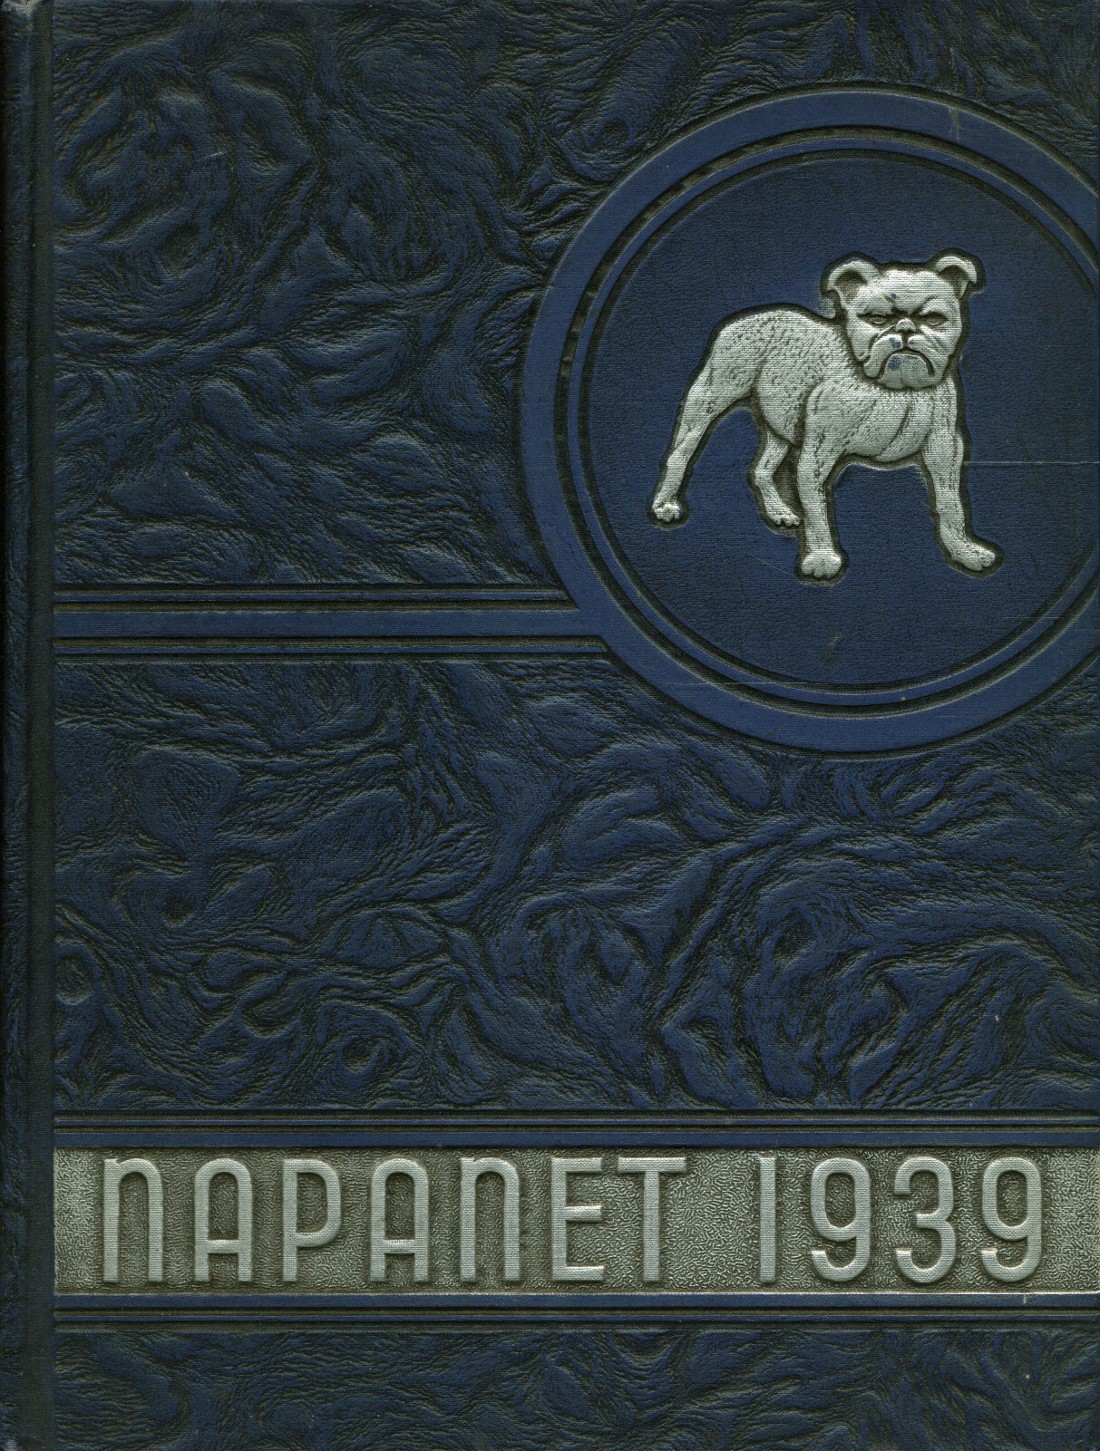 1939 yearbook from Nappanee High School from Nappanee, Indiana for sale